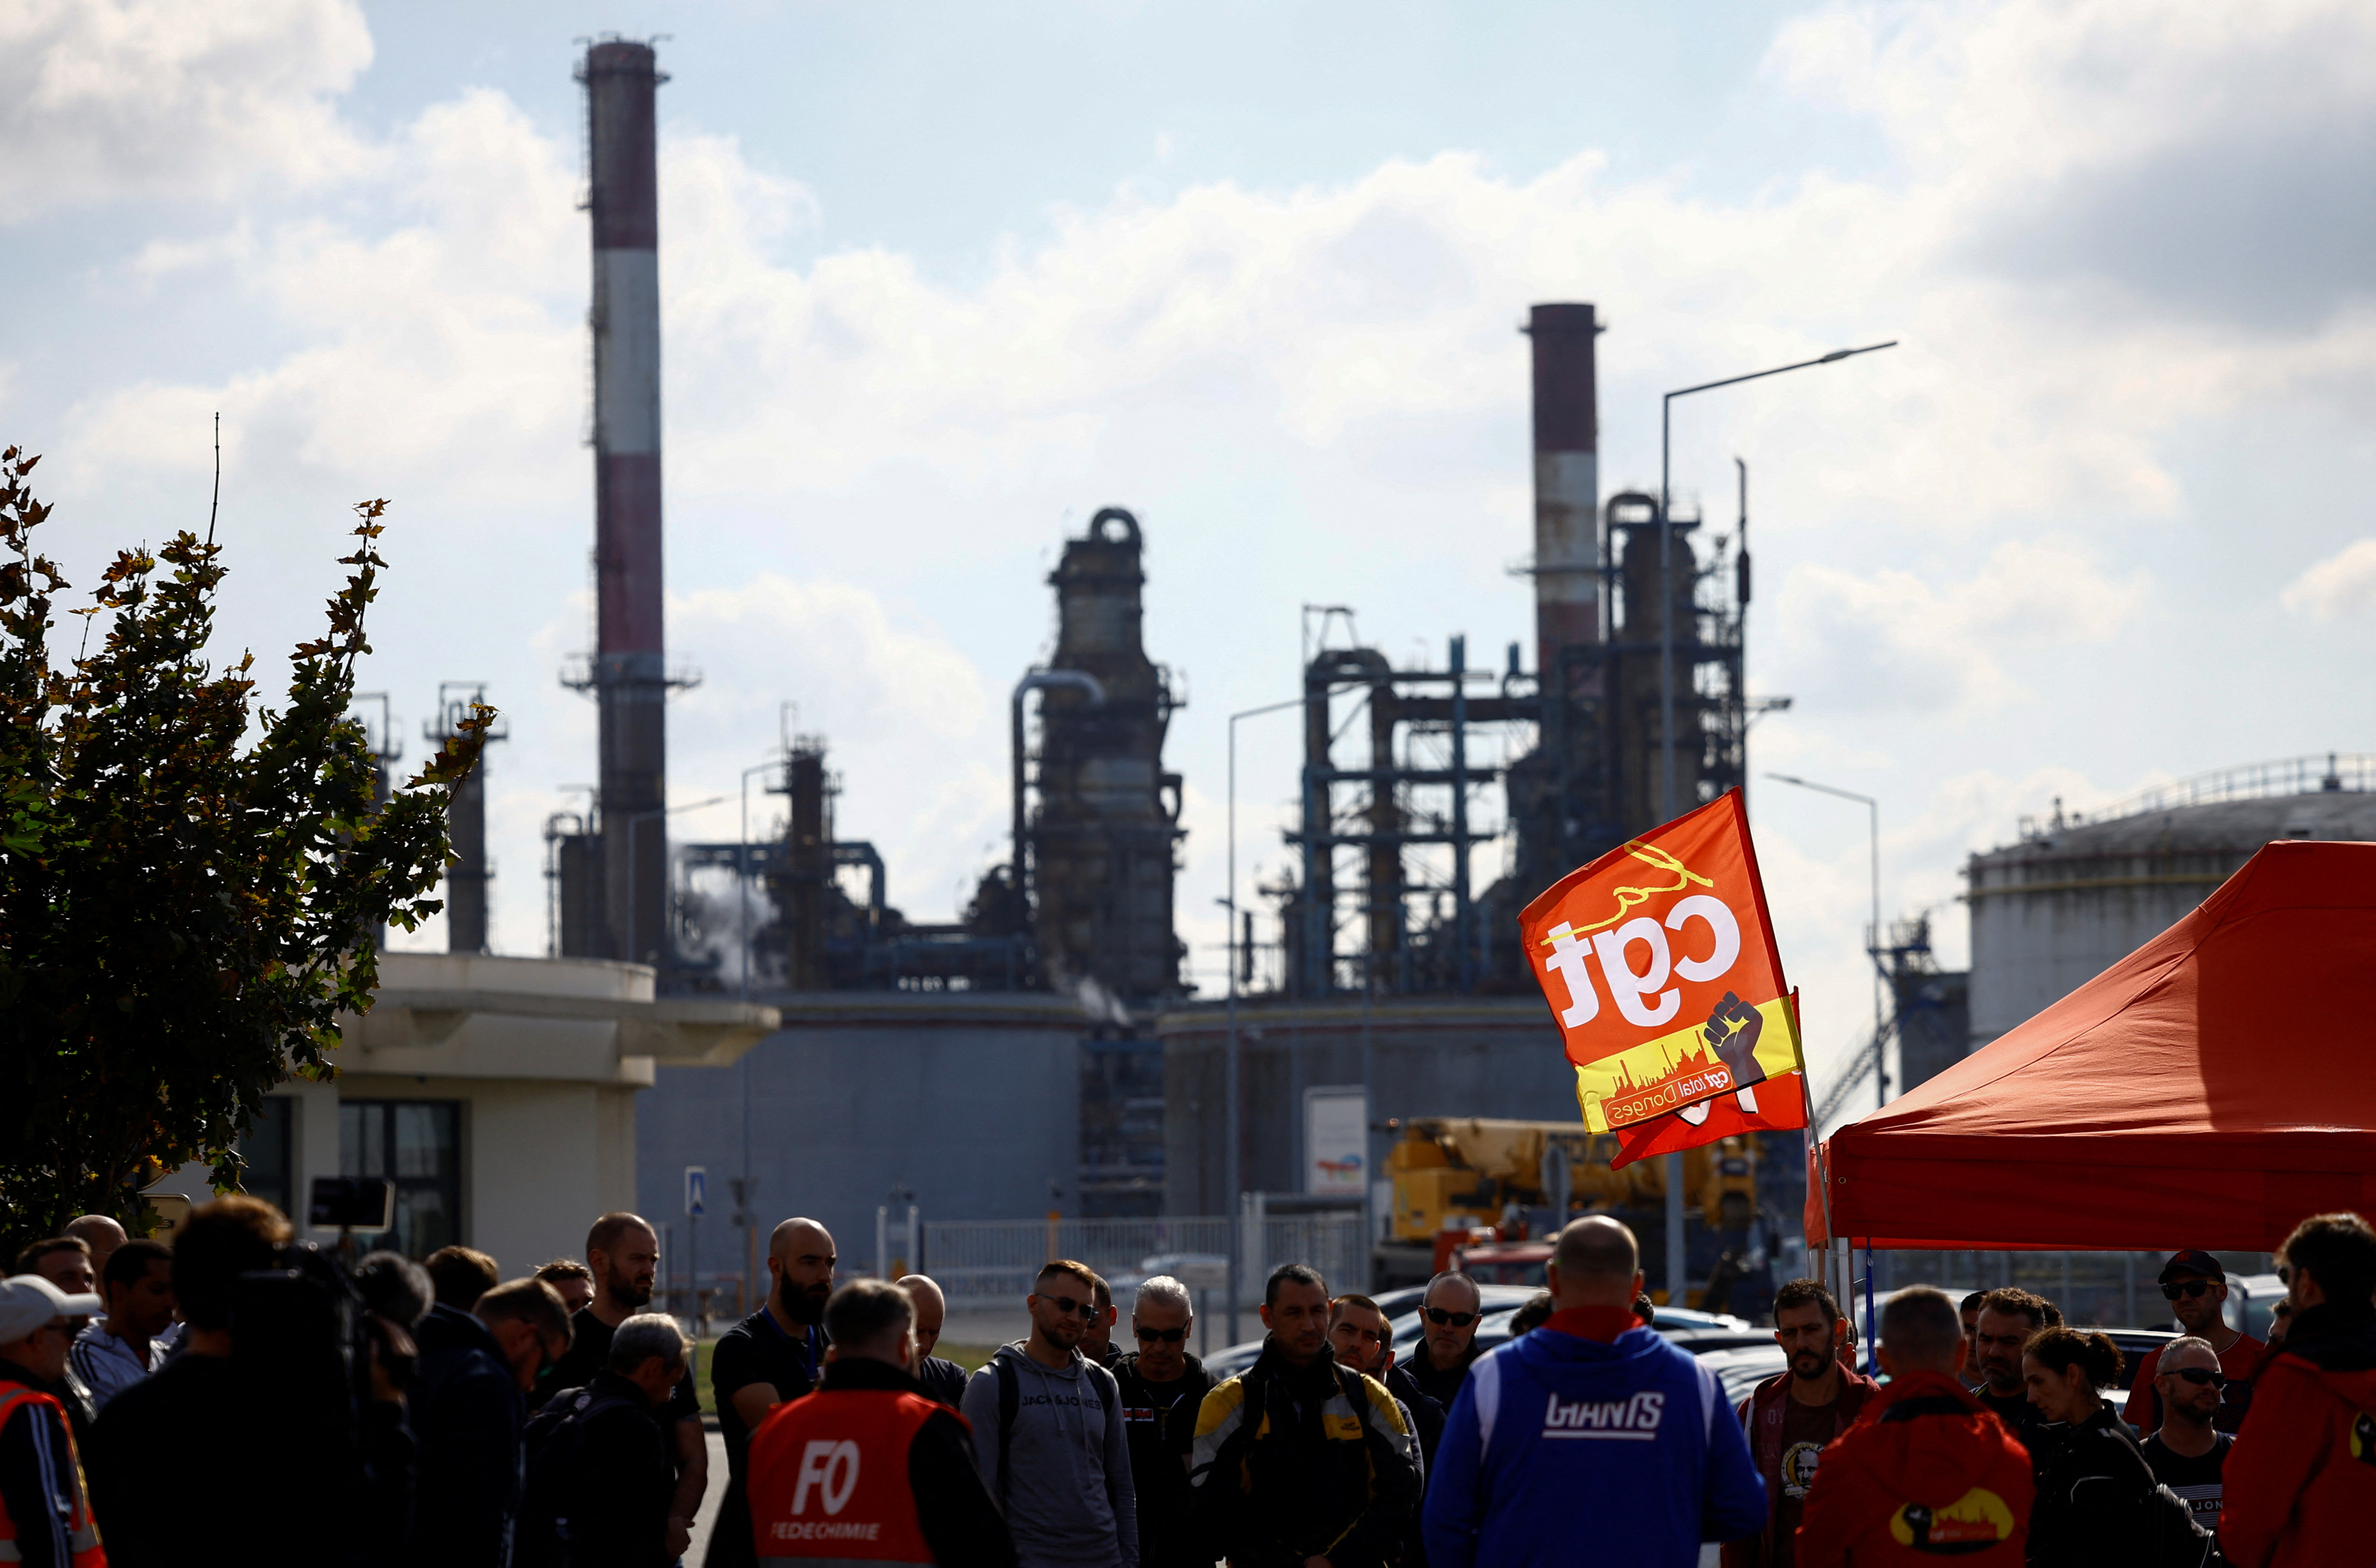 Workers on strike gather in front of the French oil giant TotalEnergies refinery in Donges